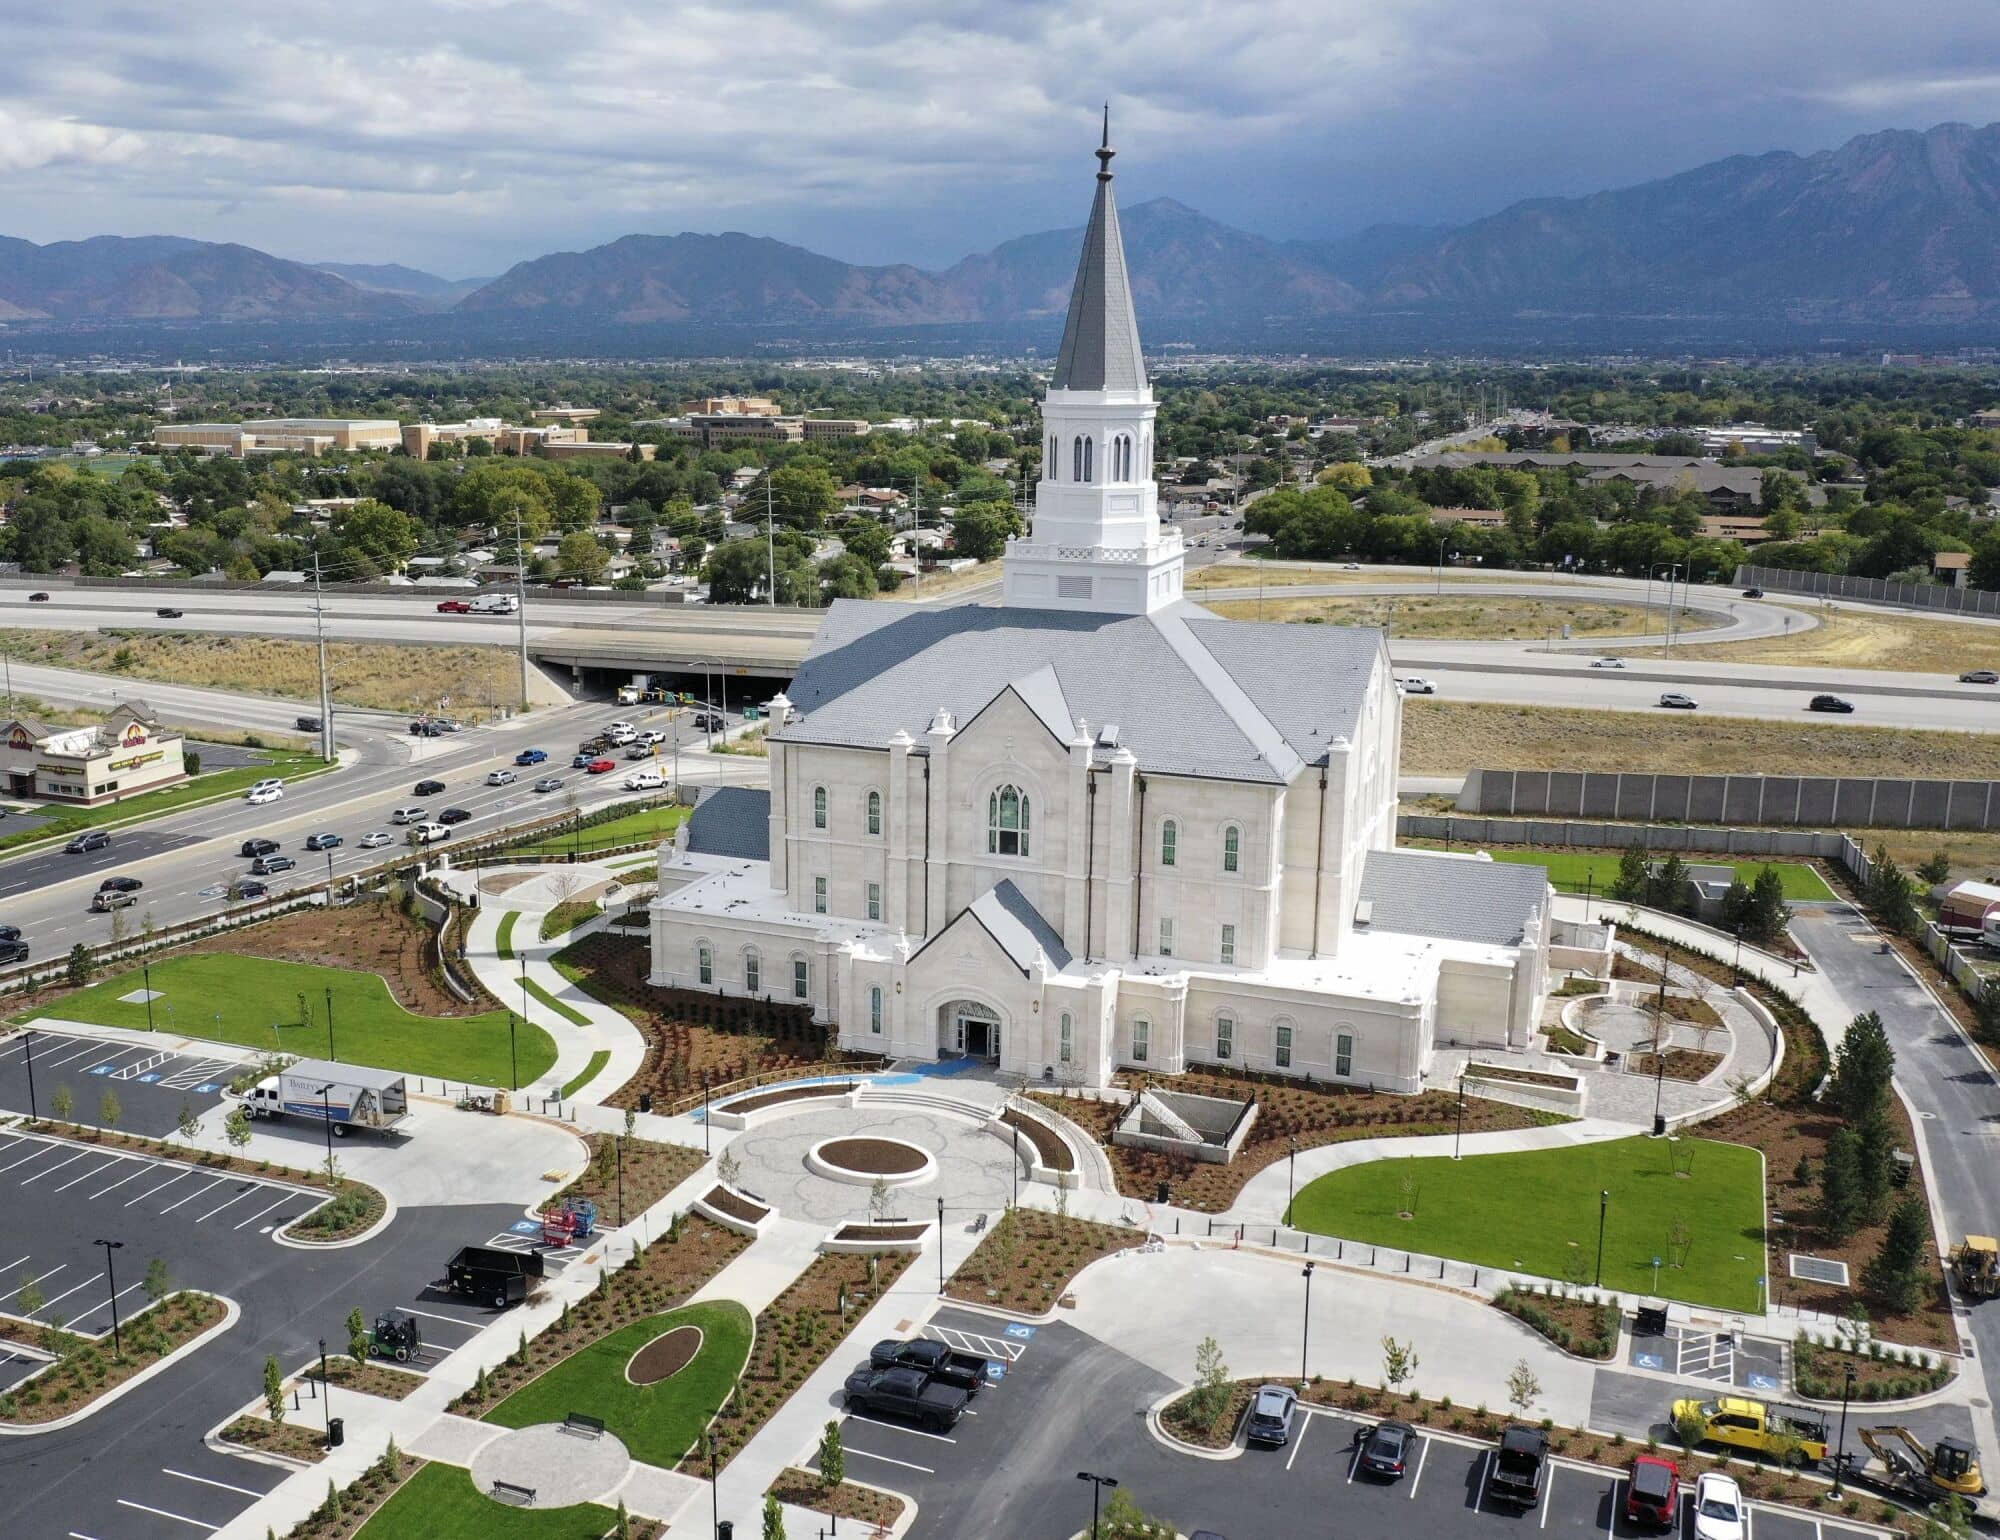 An aerial view of the Taylorsville Utah Temple, an off-white multistory building with a pointed tower above the center.